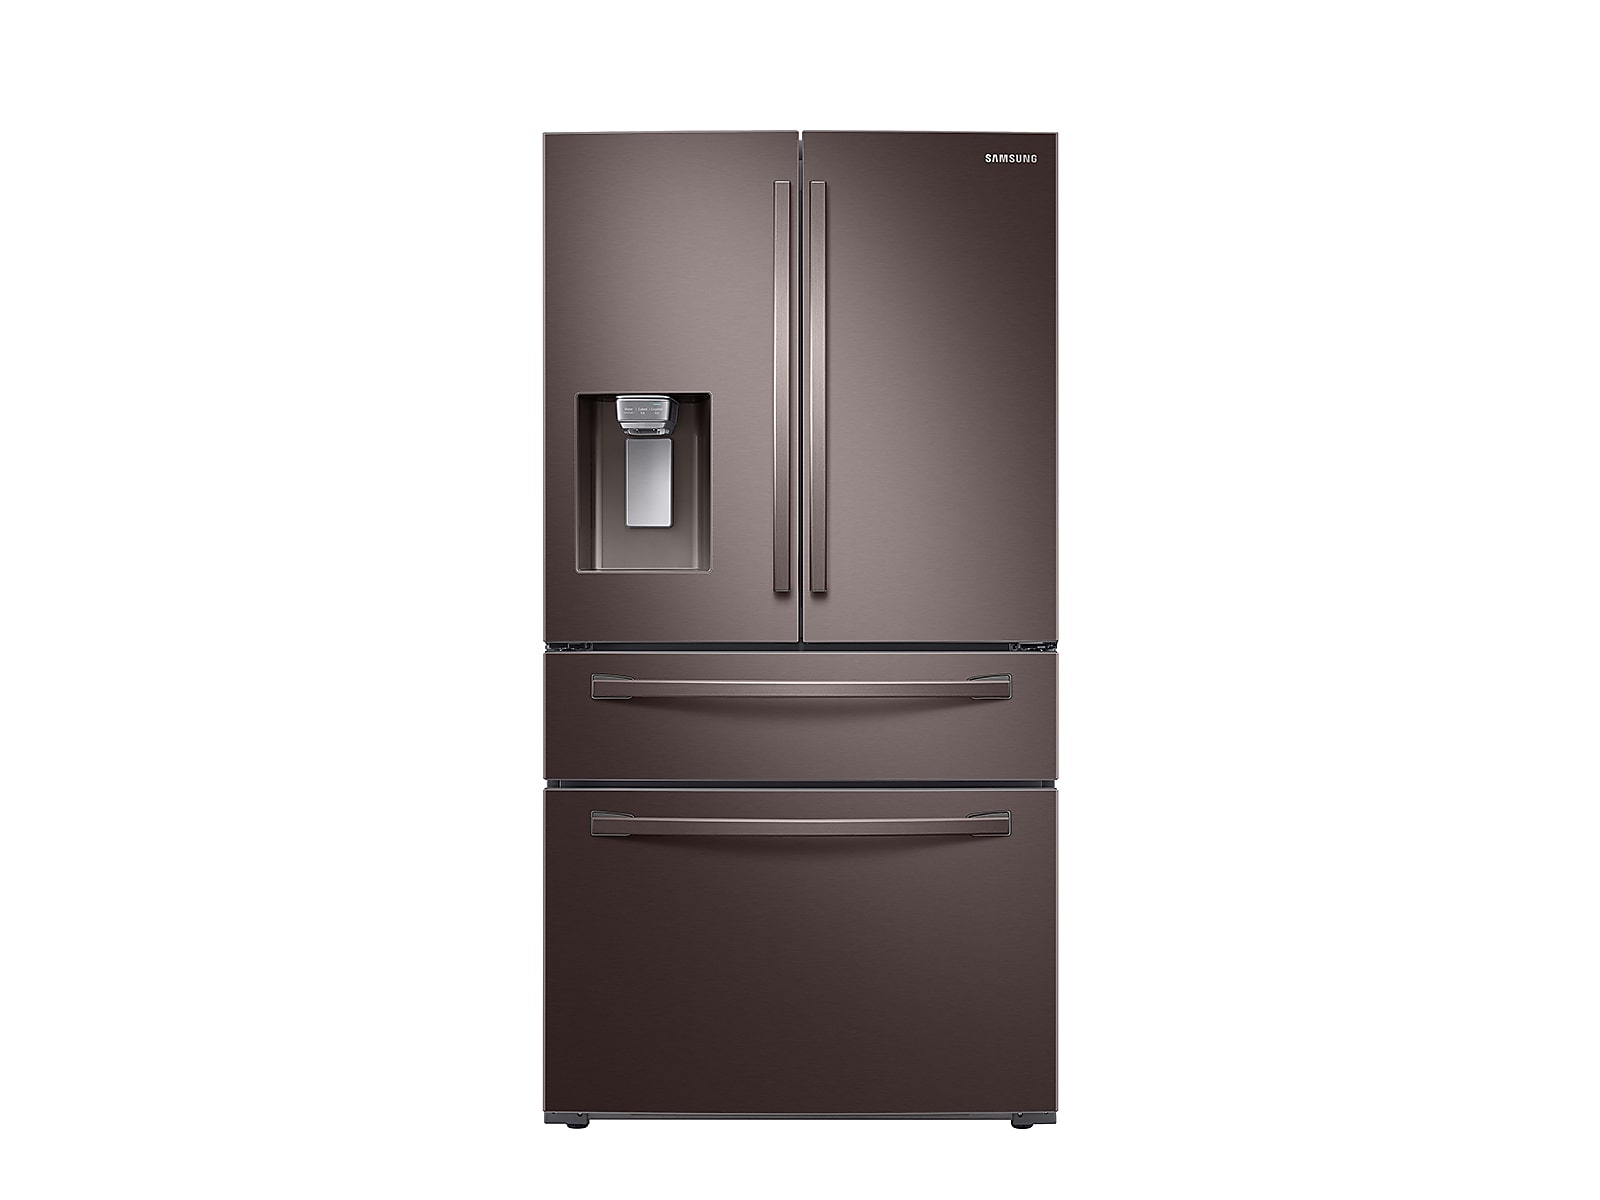 Samsung 28 cu. ft. 4-Door French Door Refrigerator with FlexZone™ Drawer in Tuscan Stainless Steel(RF28R7201DT/AA)